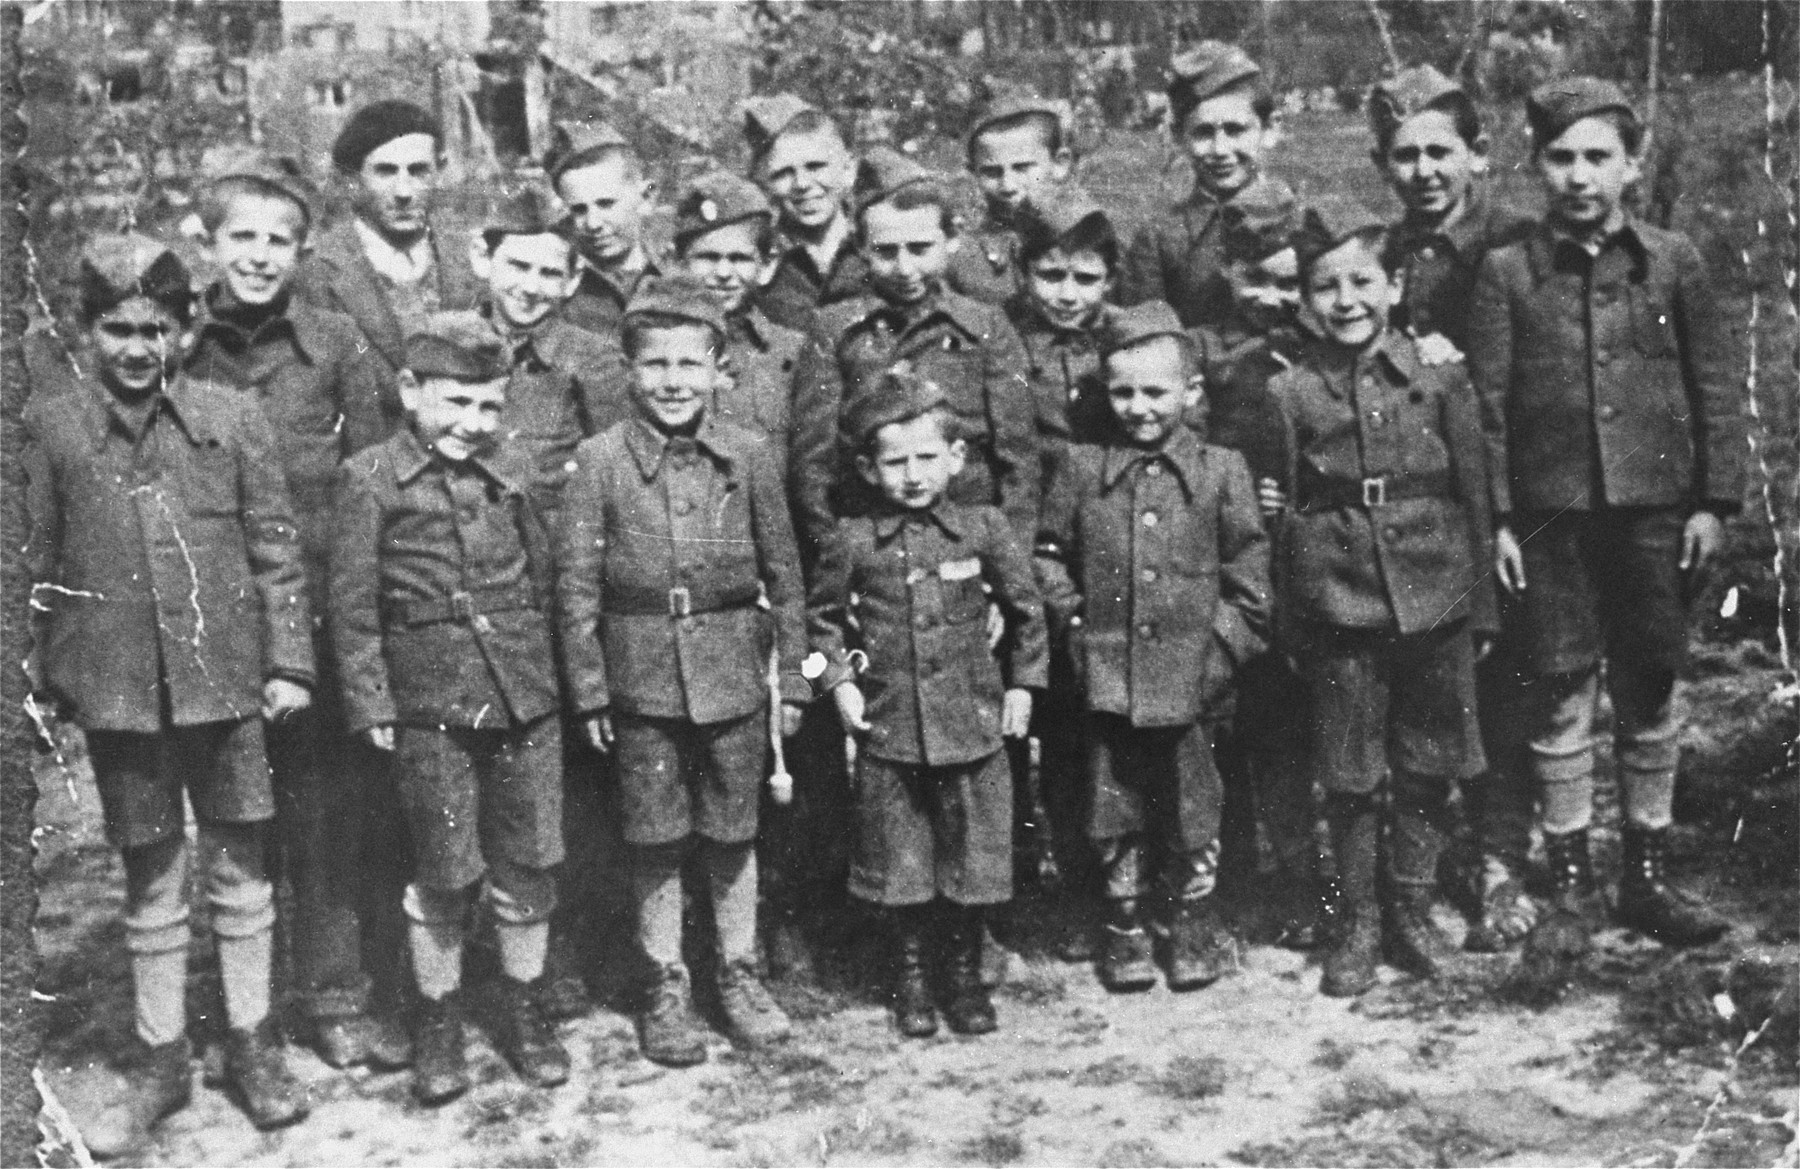 Group portrait of child survivors of the Buchenwald concentration camp.  

The boys are dressed in outfits made from German uniforms due to a clothing shortage.  Among those pictured are first row (left to right): Lolek Blum, David Perlmutter, Birenbaum, Joseph Schleifstein,  unidentified, and Israel Meir Lau (middle row, far right).  Middle row: Nathan Szwarc, Jack Neeman, Berek Silber, Jacques Finkel, unidentified, Marek Milstein, and Salek Finkelsztein.  Back row: Elek Grinbaum [or Grinberg], Chaim Finkelstajn [or Charles Finkel], Romek Wekselman [or Wajsman], and Abram Czapnik.